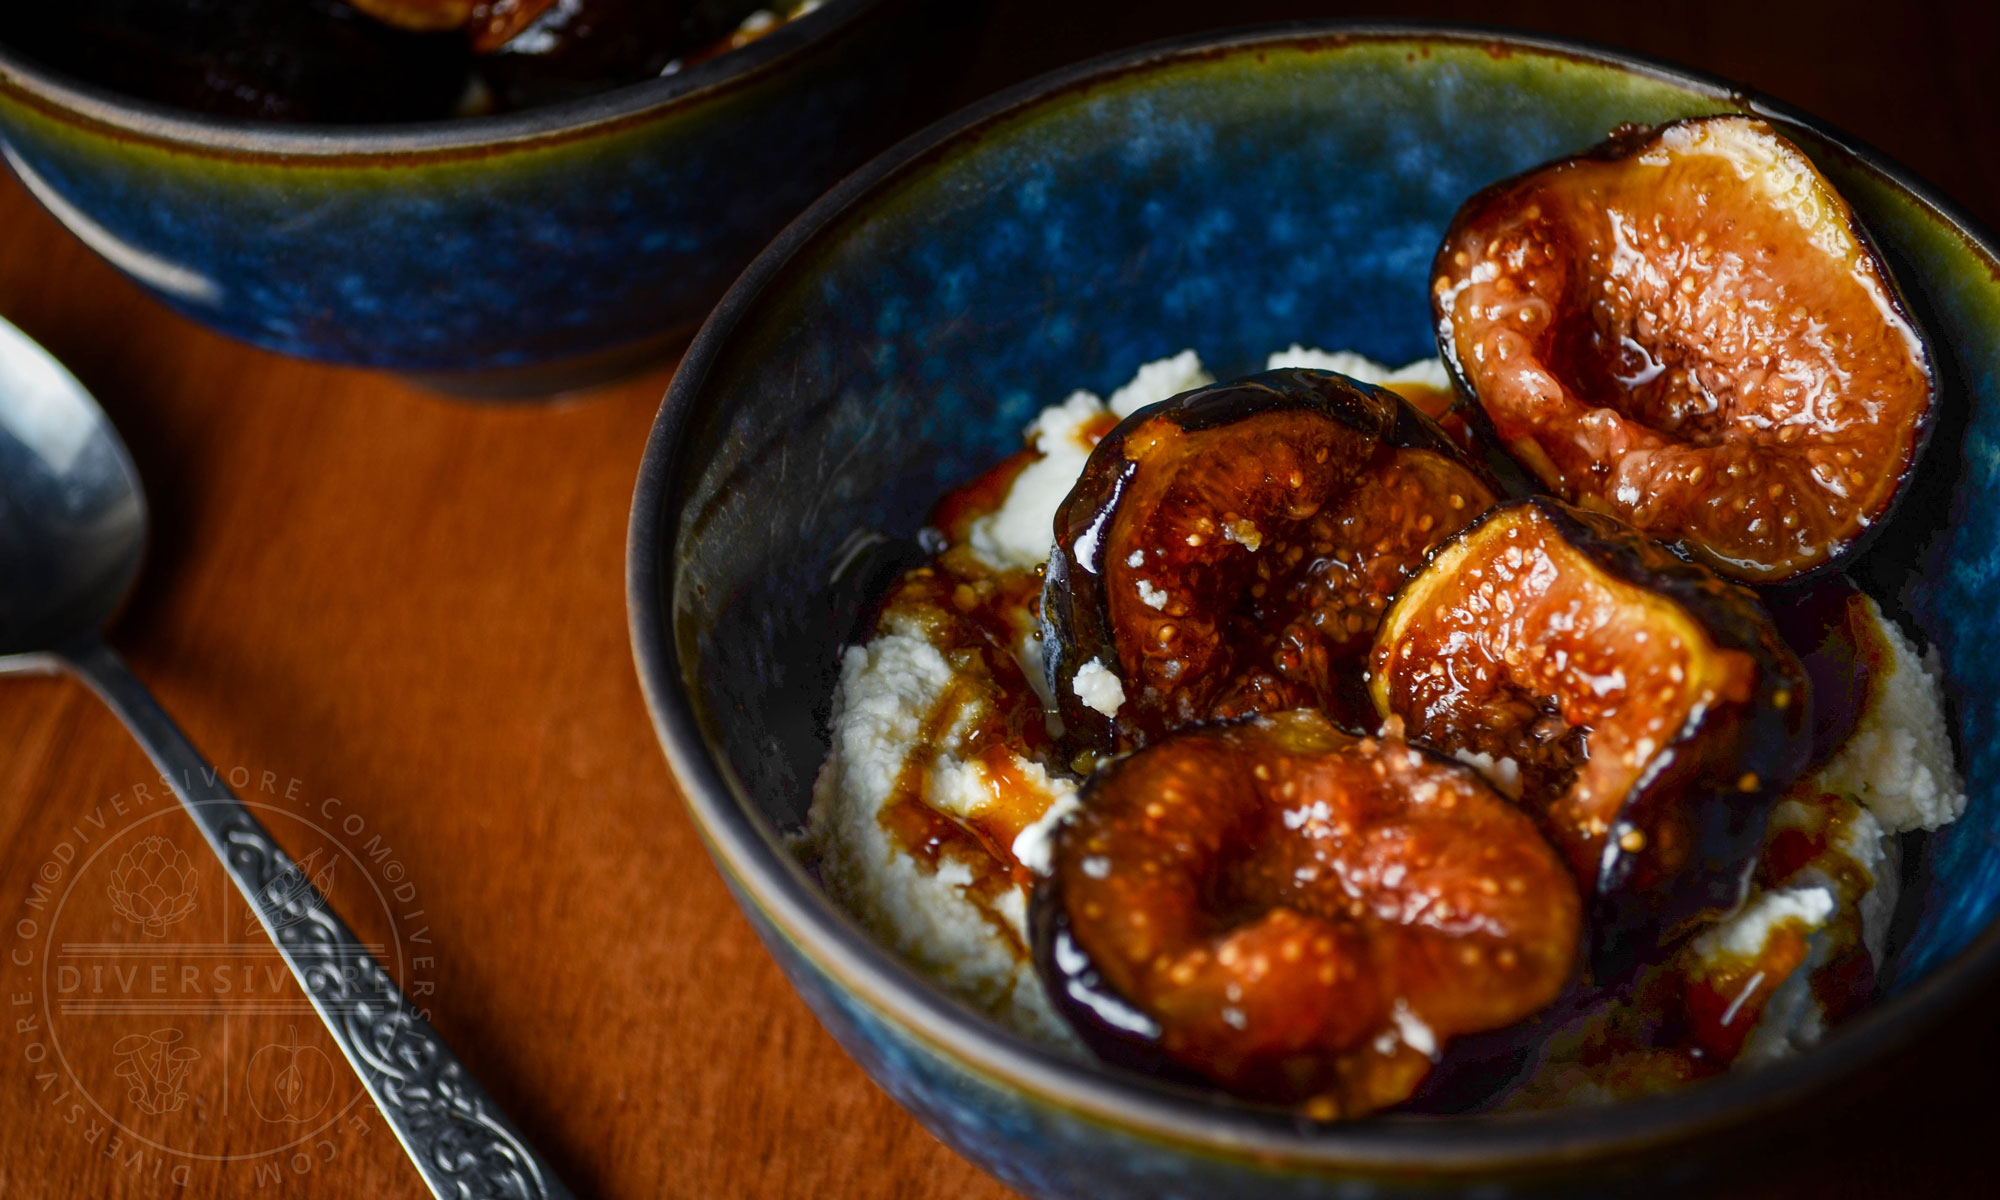 Featured image for “Mission Figs with Whisky Caramel and Ricotta”